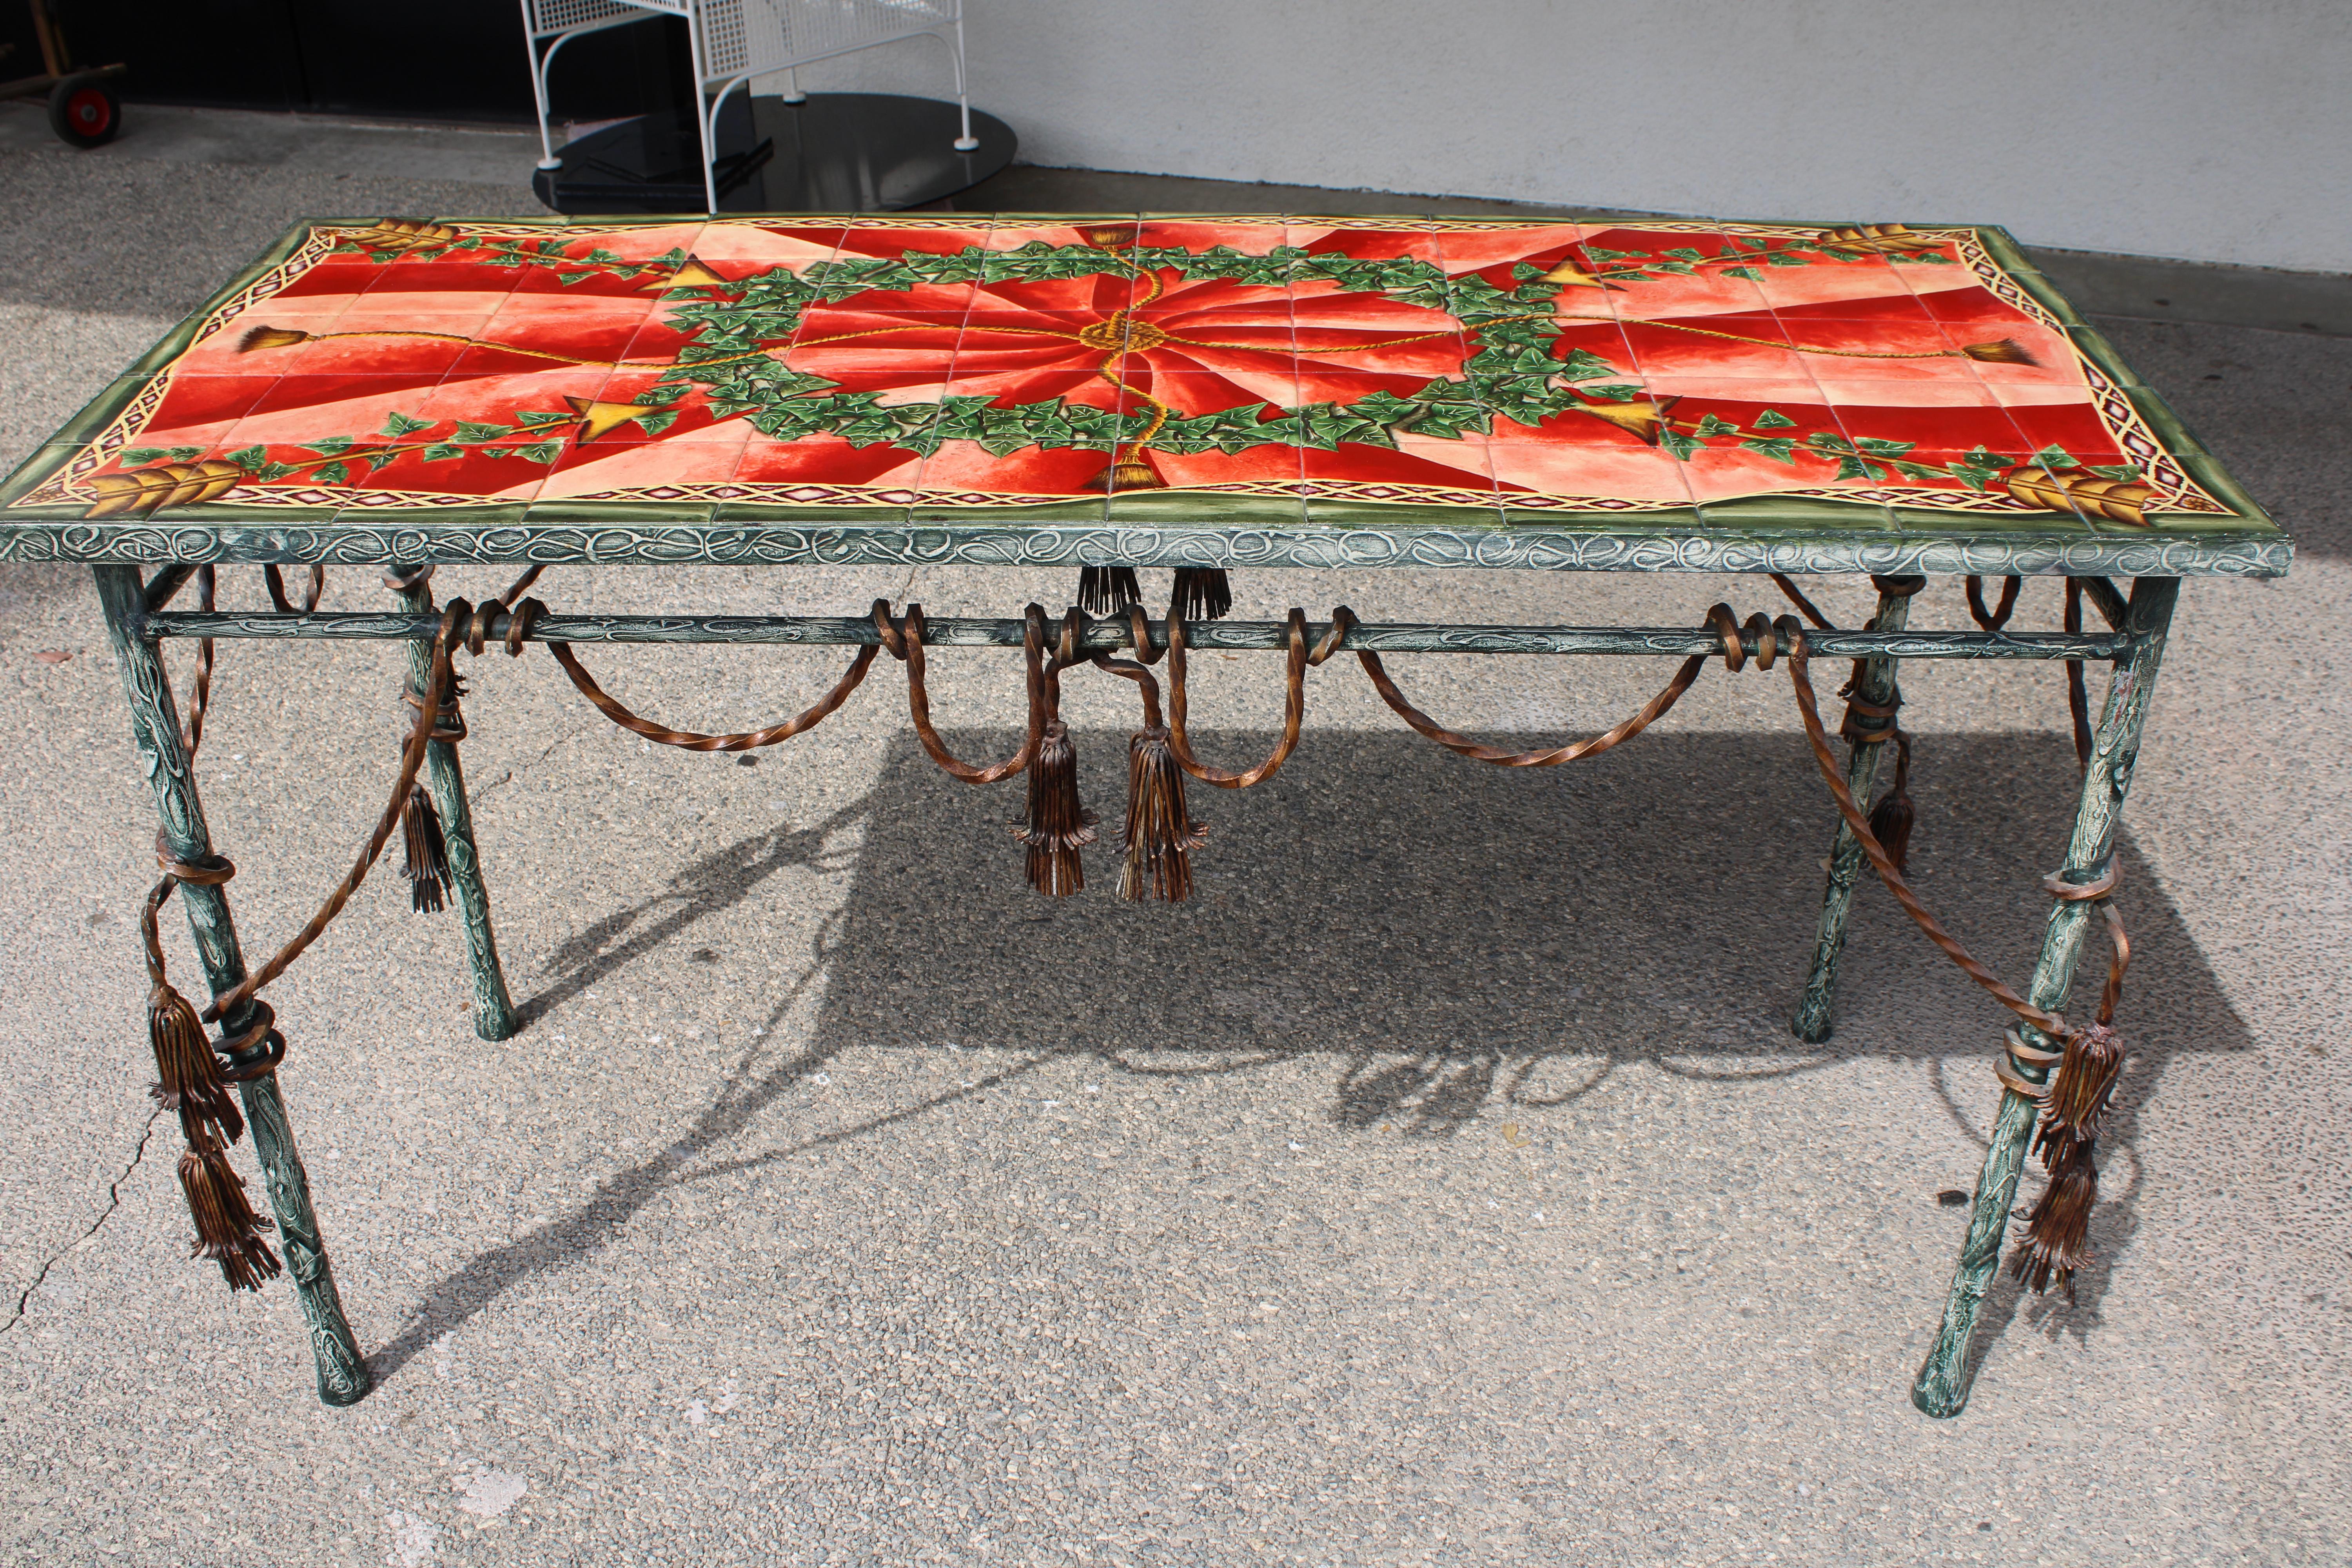 A Modern Italian style patinated metal and polychrome console table, having a rectangular top with hand painted glazed ceramic tiles depicting ivy garlands and arrows. The patinated base with leaf form legs and tassels surround the table base. Table